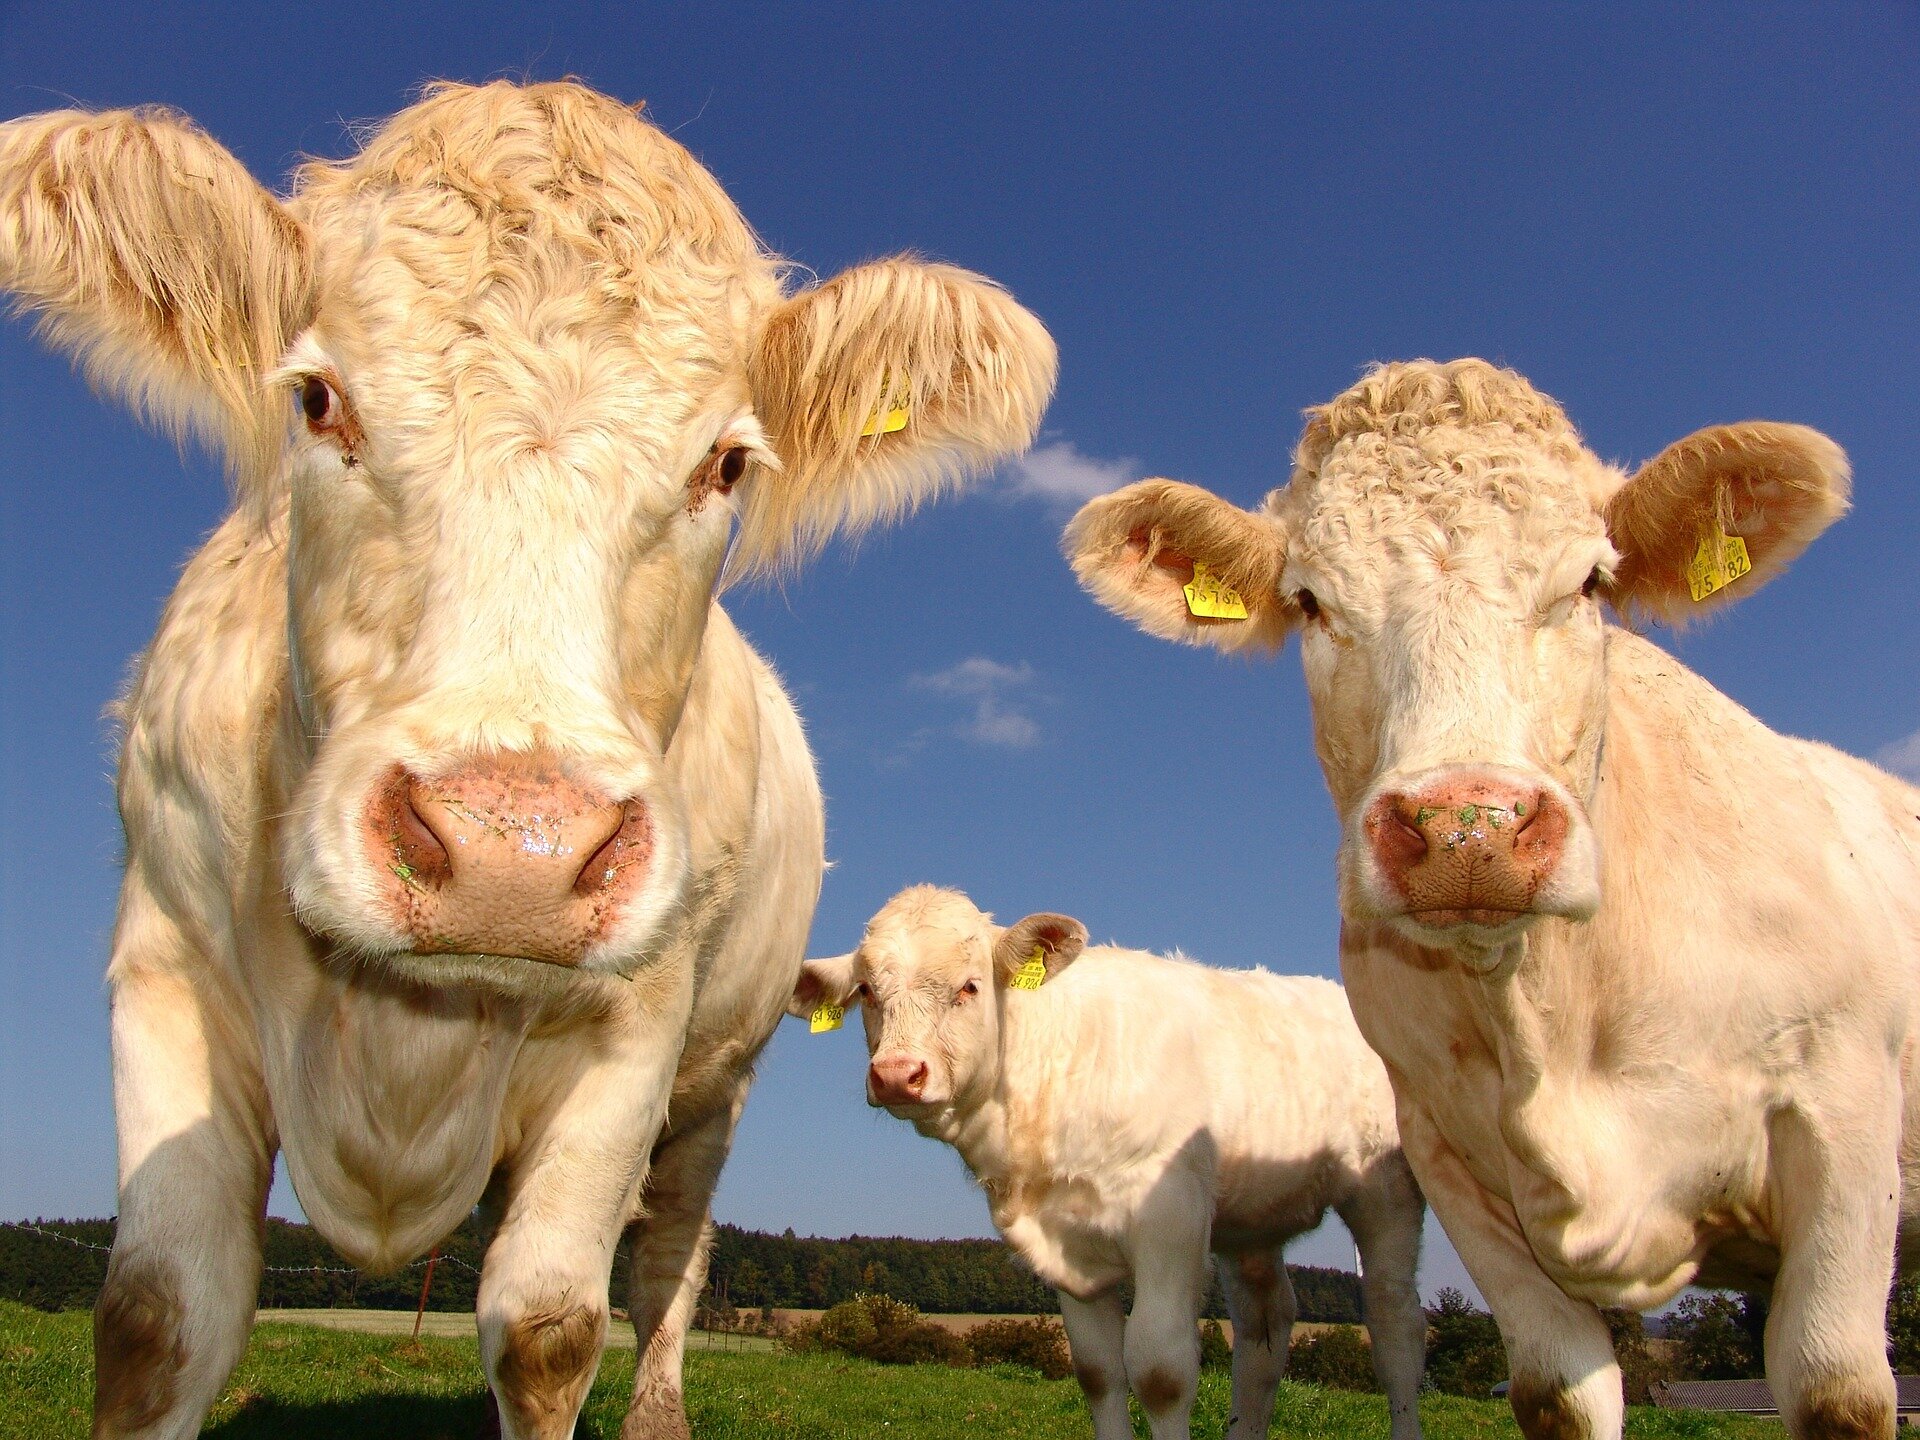 Is the U.S. understating climate emissions from meat and dairy production?